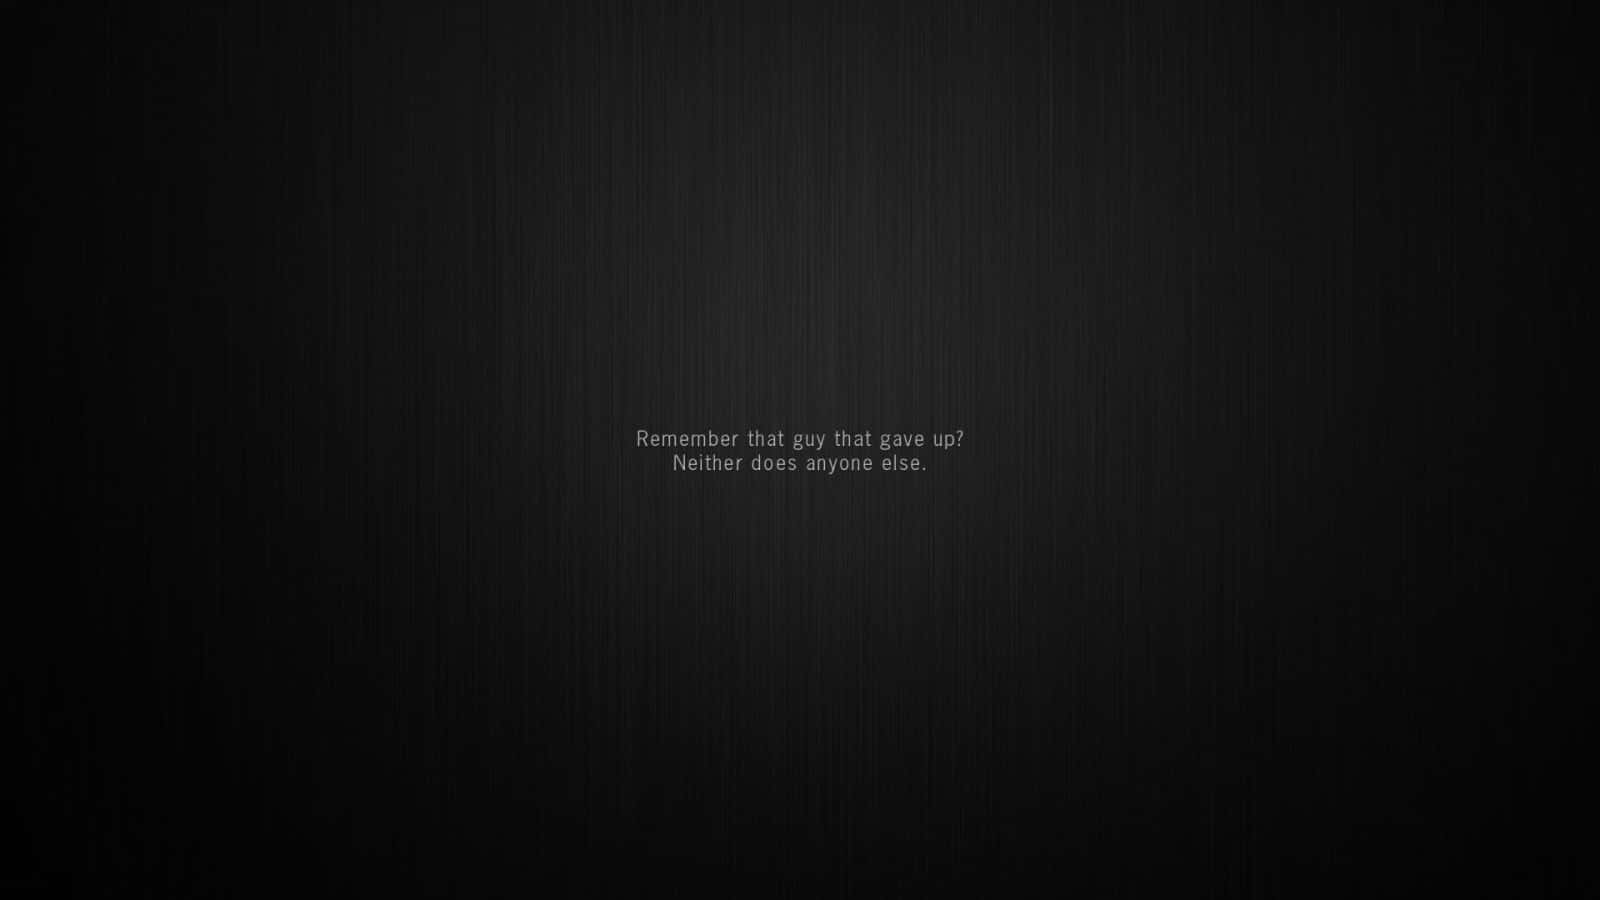 Motivational Quote on a Black Background